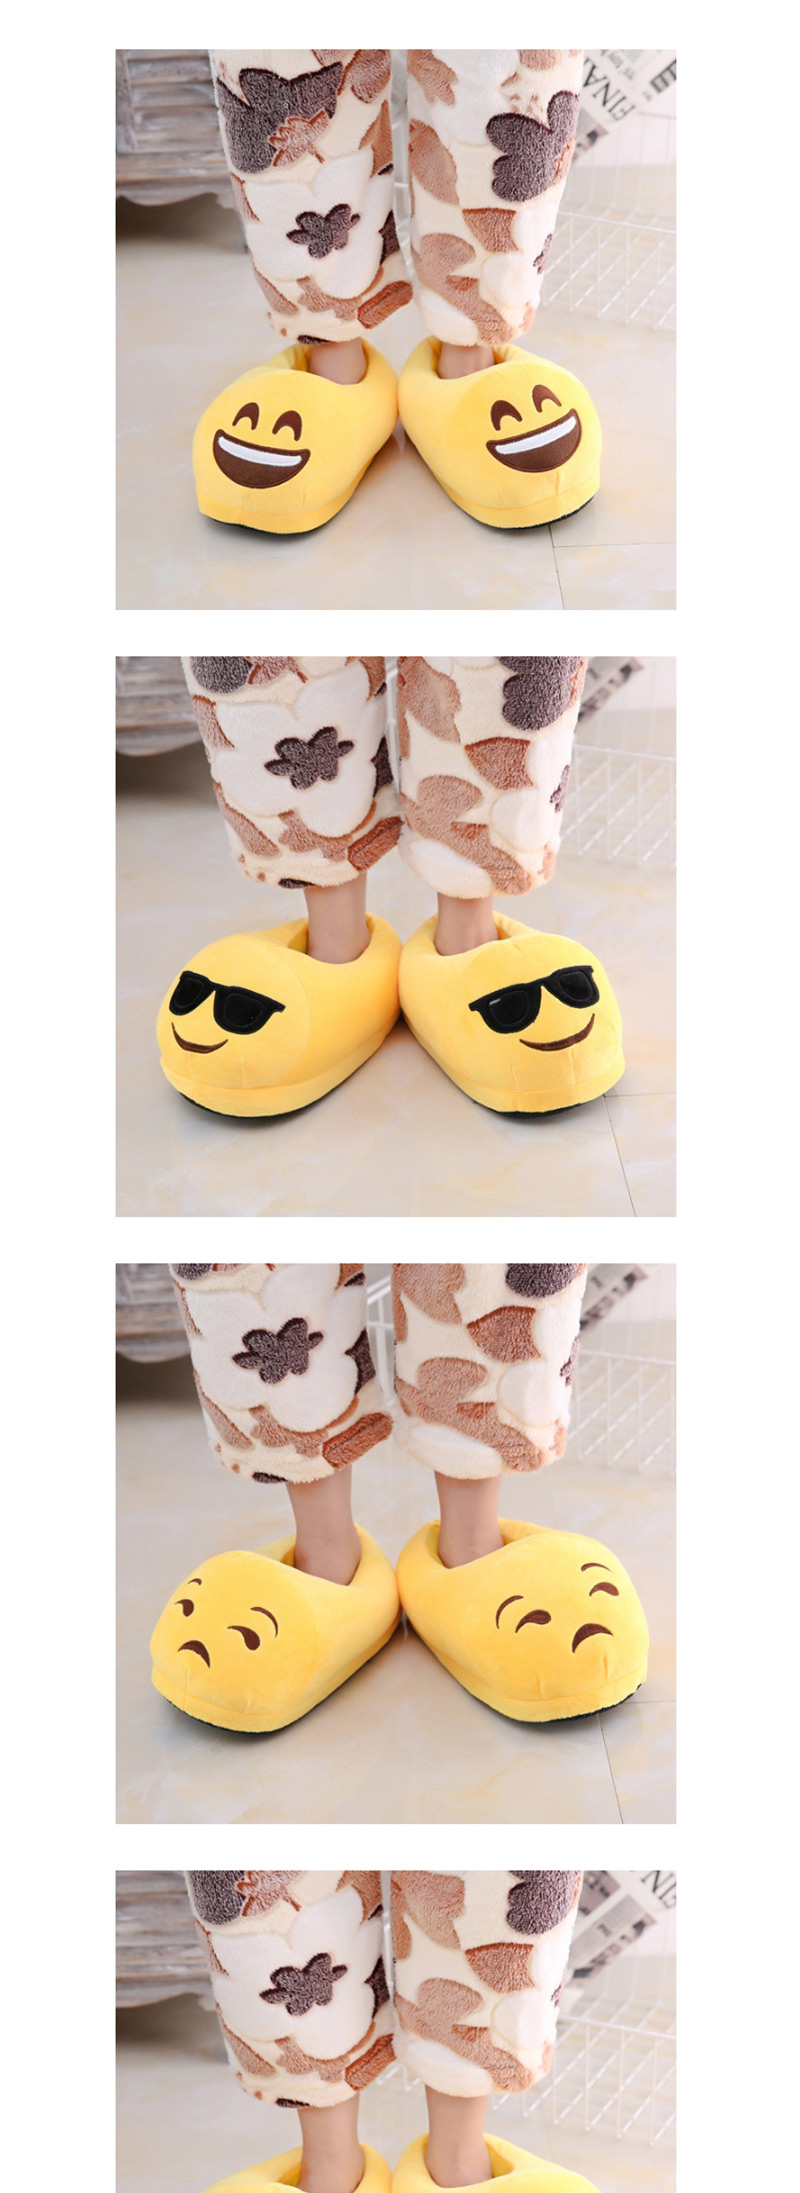 Fashion 15 Yellow Sleeping Cartoon Expression Plush Bag With Cotton Slippers,Slippers